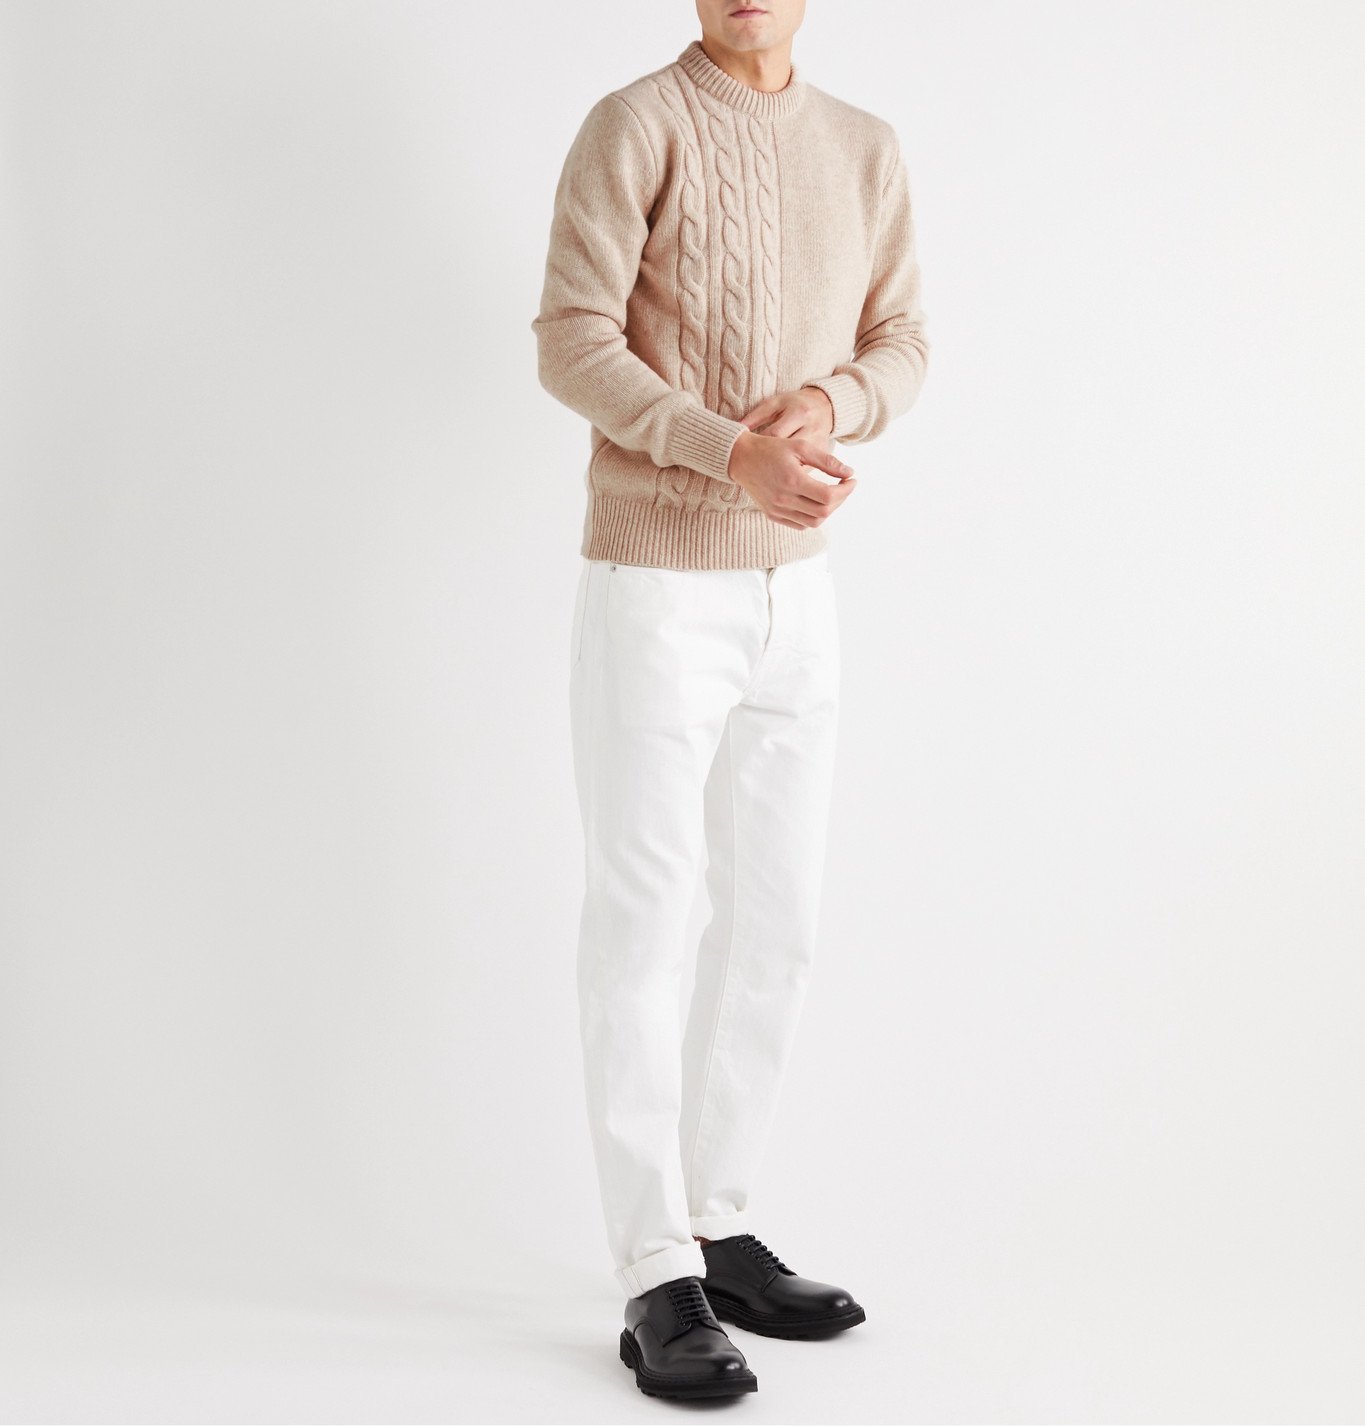 Oliver Spencer - Blenheim Cable-Knit Wool Sweater - Neutrals